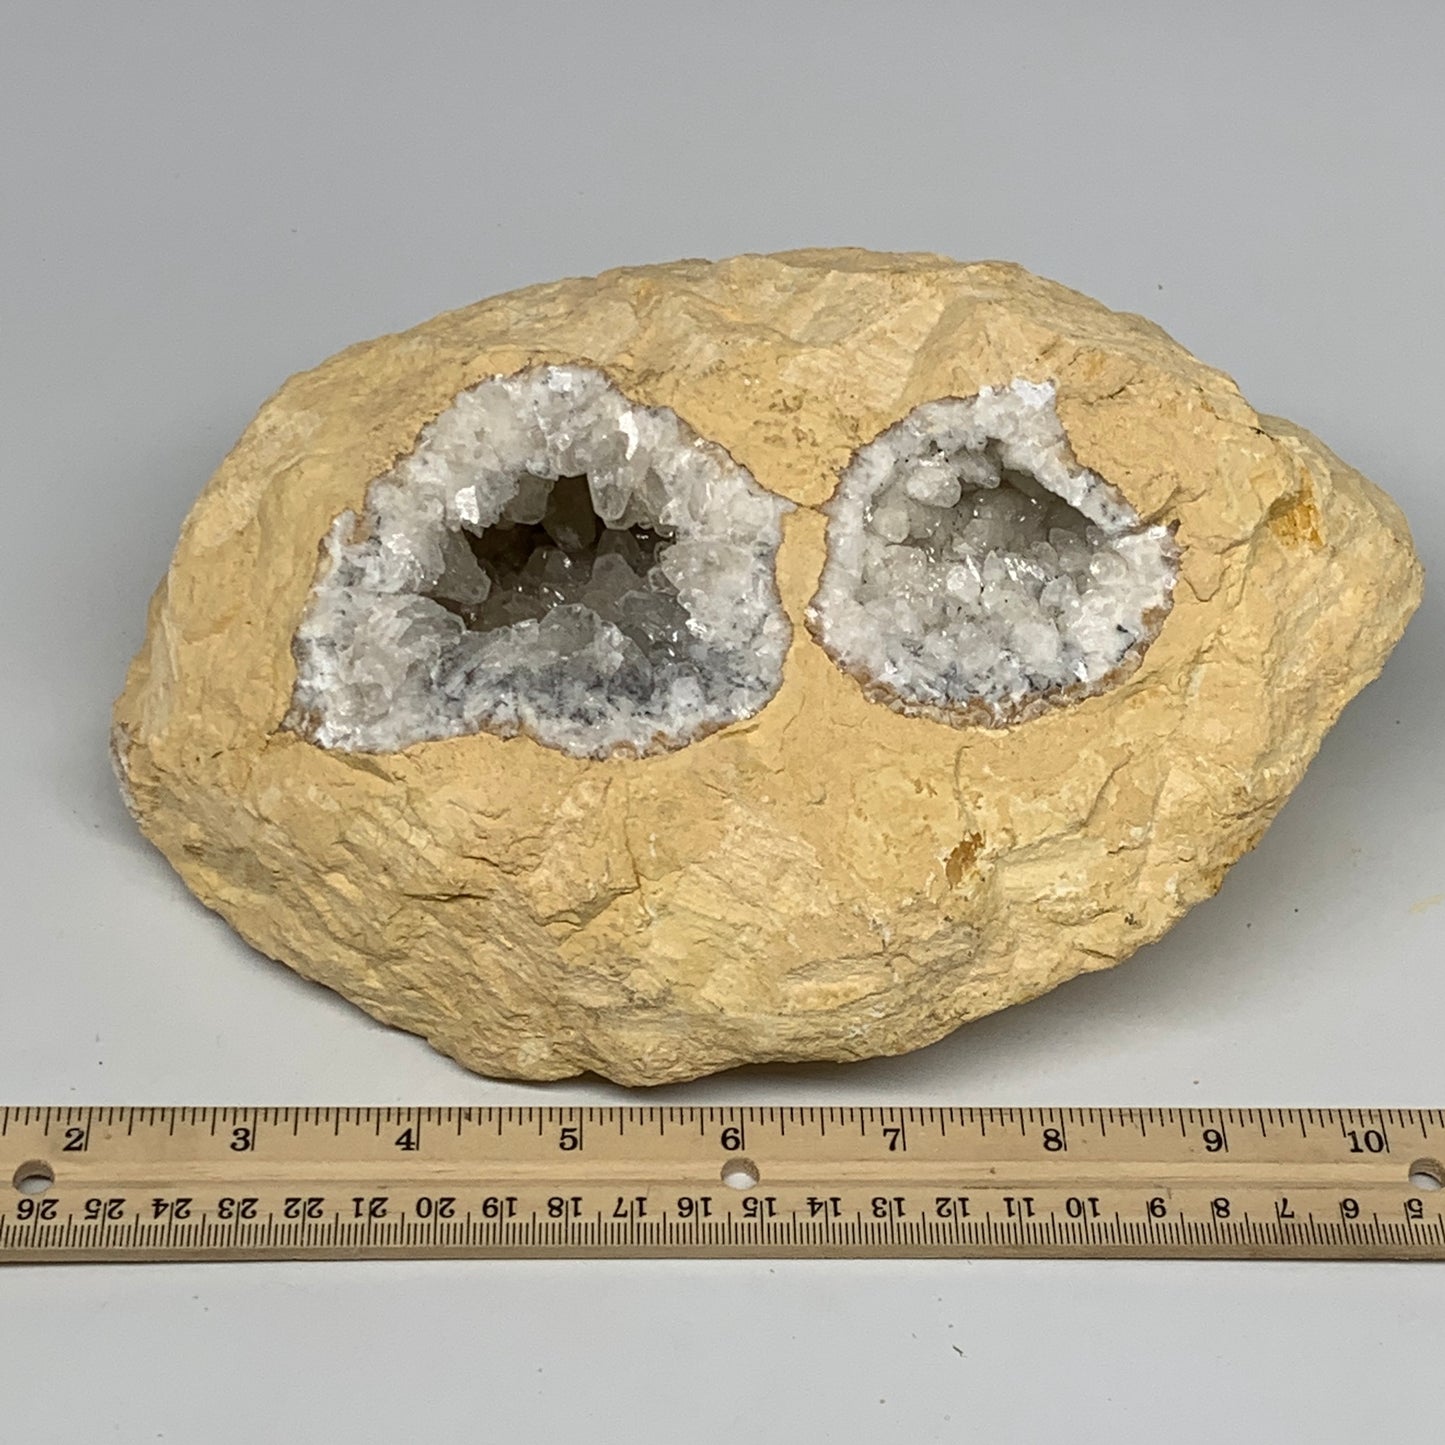 5.56 lbs, 8.5"x5.8"x3.2", Natural Calcite Geode Mineral Specimens @Morocco, B111